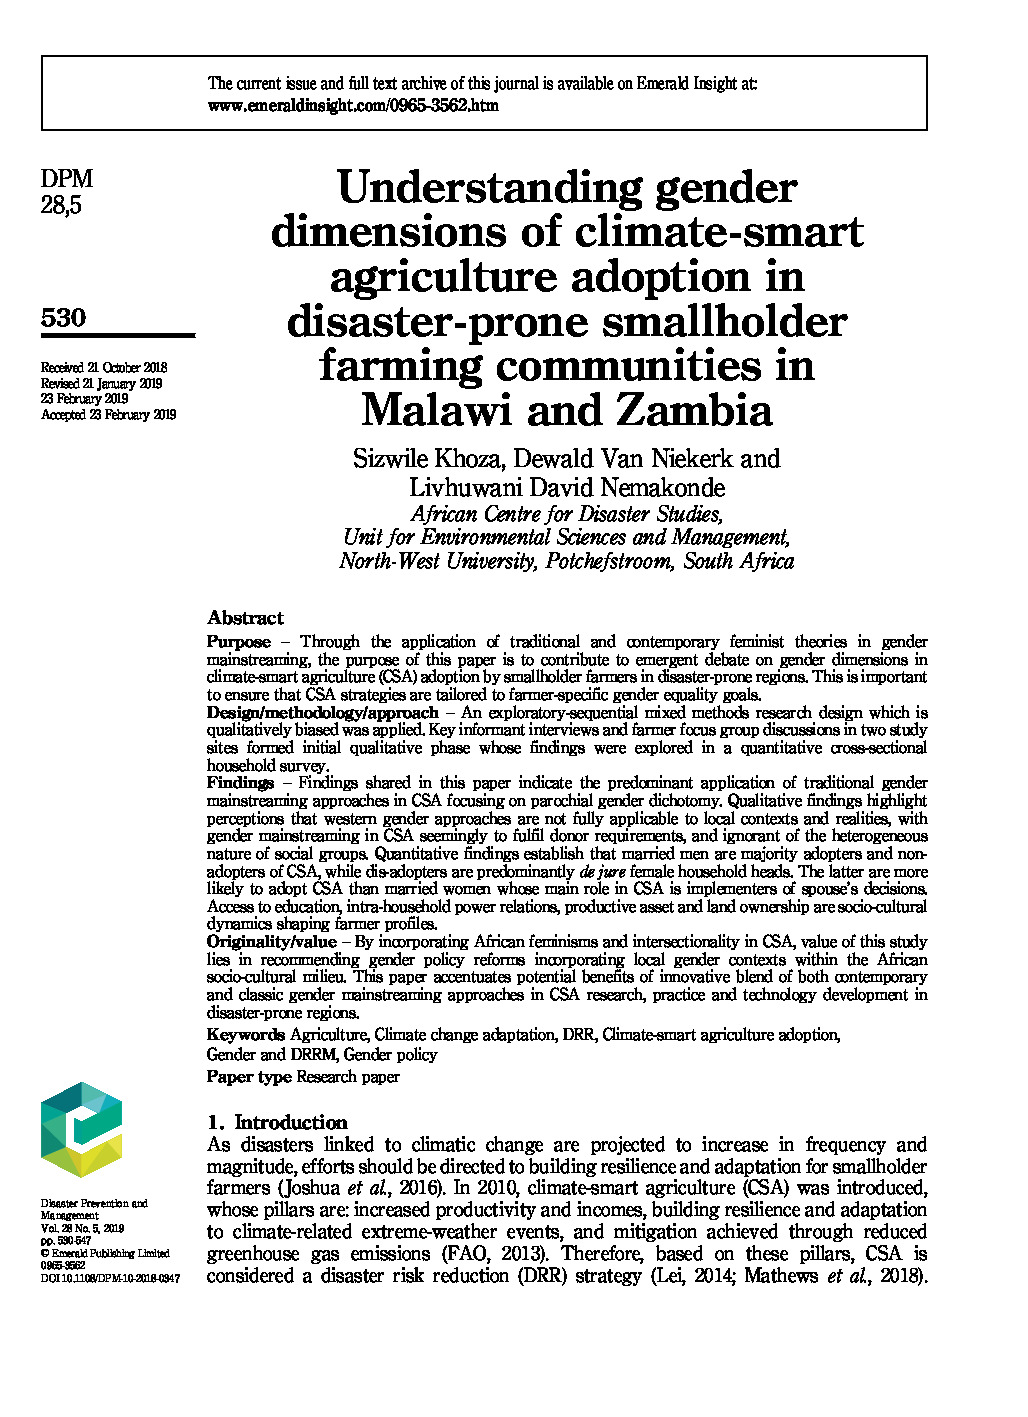 Understanding gender dimensions of climate-smart agriculture adoption in disaster-prone smallholder farming communities in Malawi and Zambia